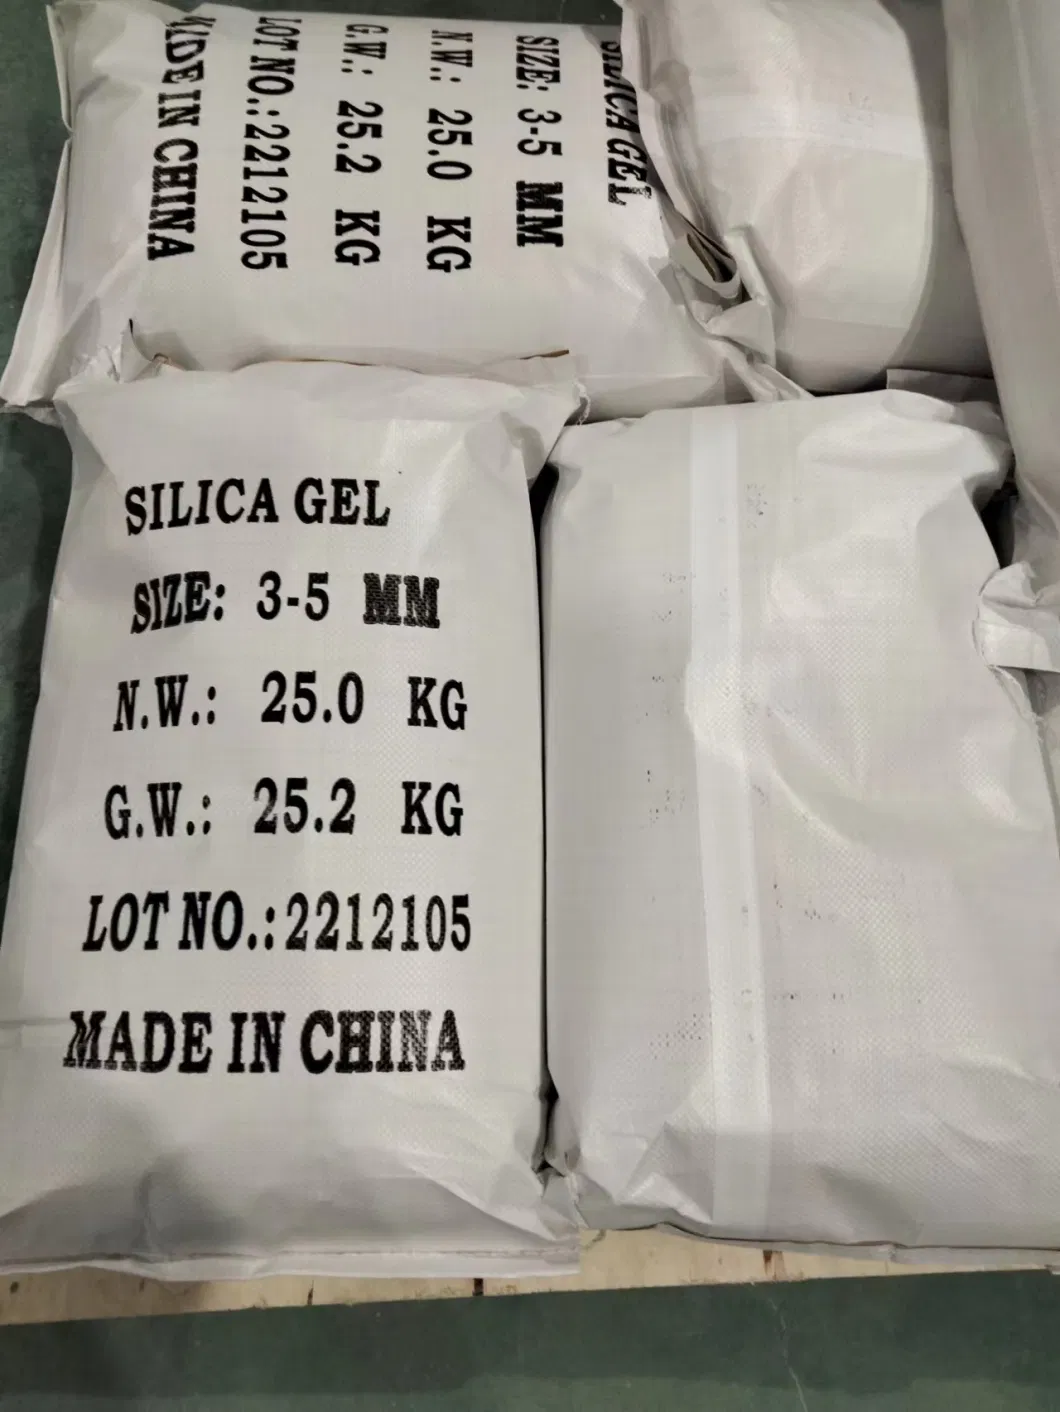 Type a Desiccant White Silica Gel with Size 3-5mm